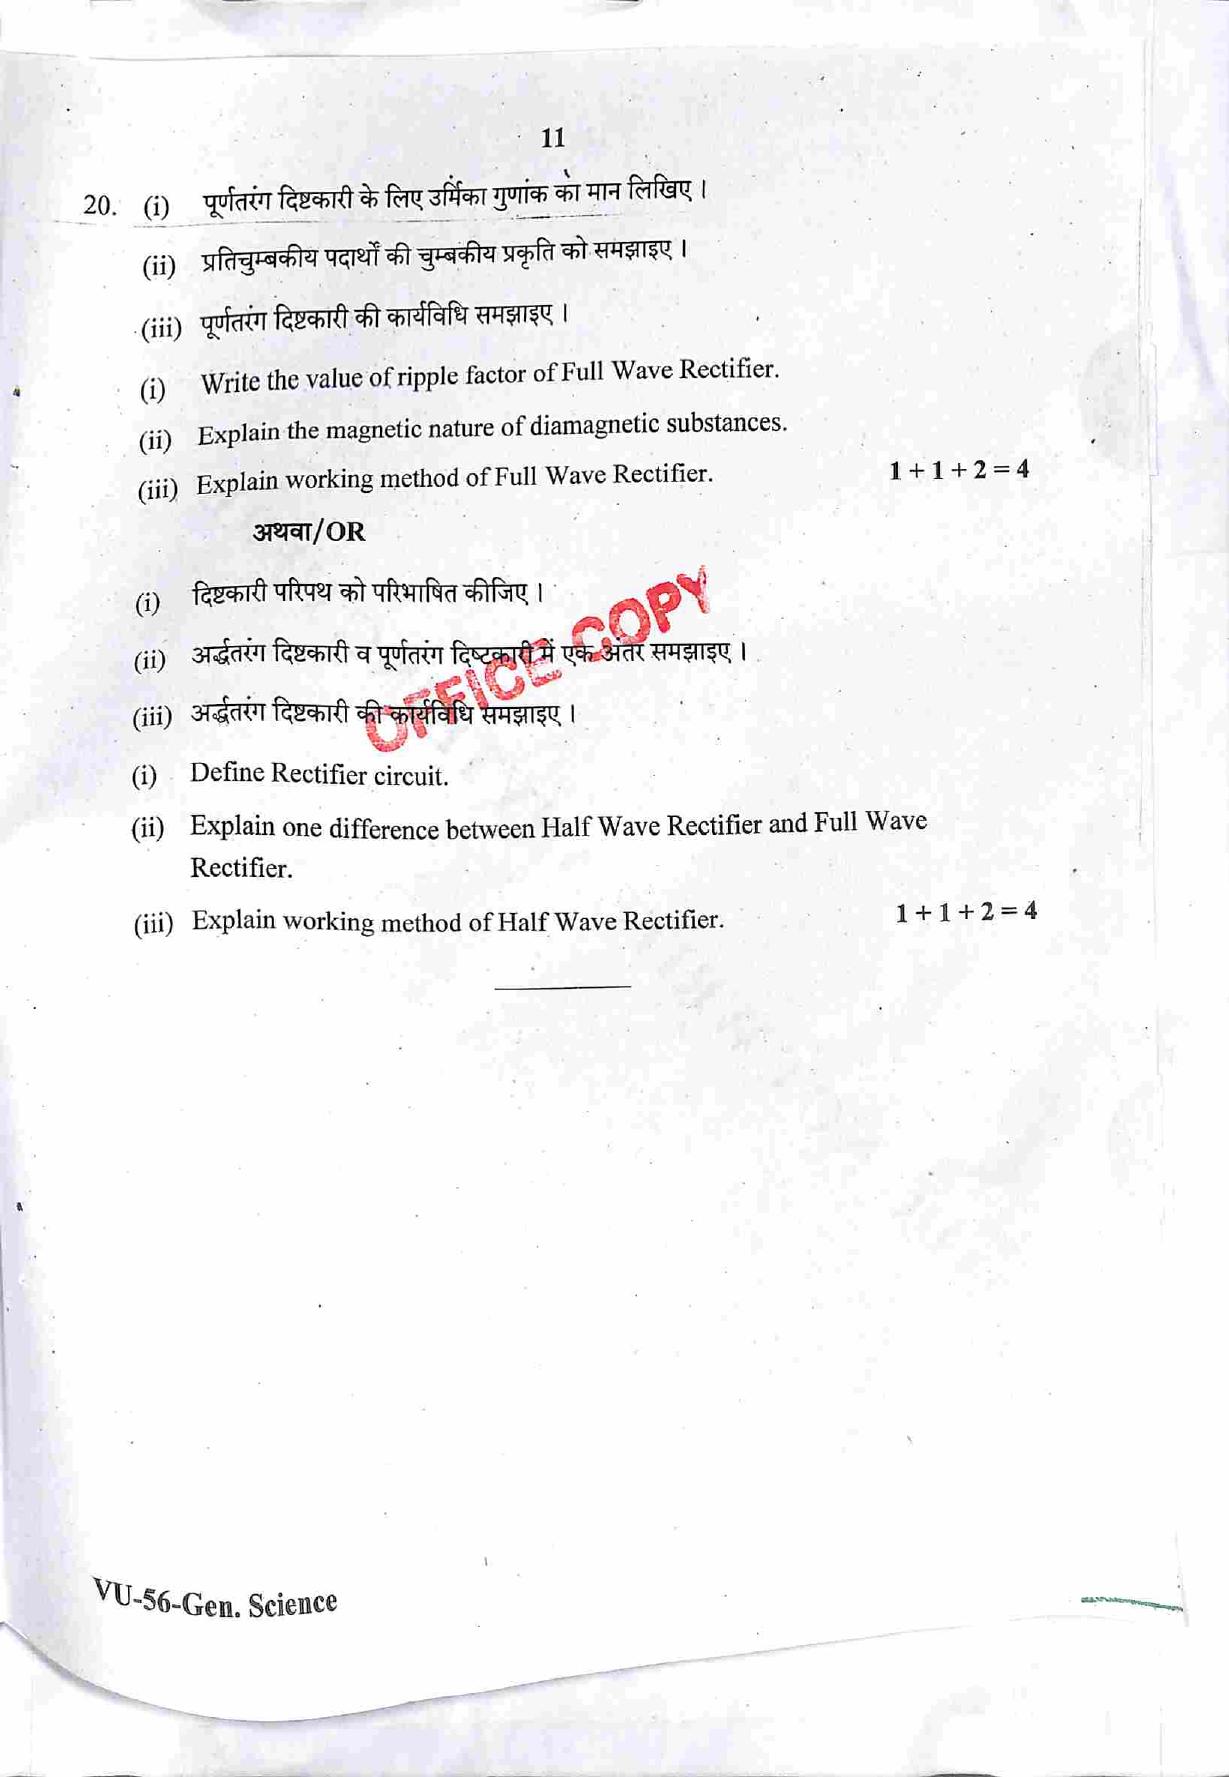 RBSE 2022 General Science Upadhyay Question Paper - Page 12